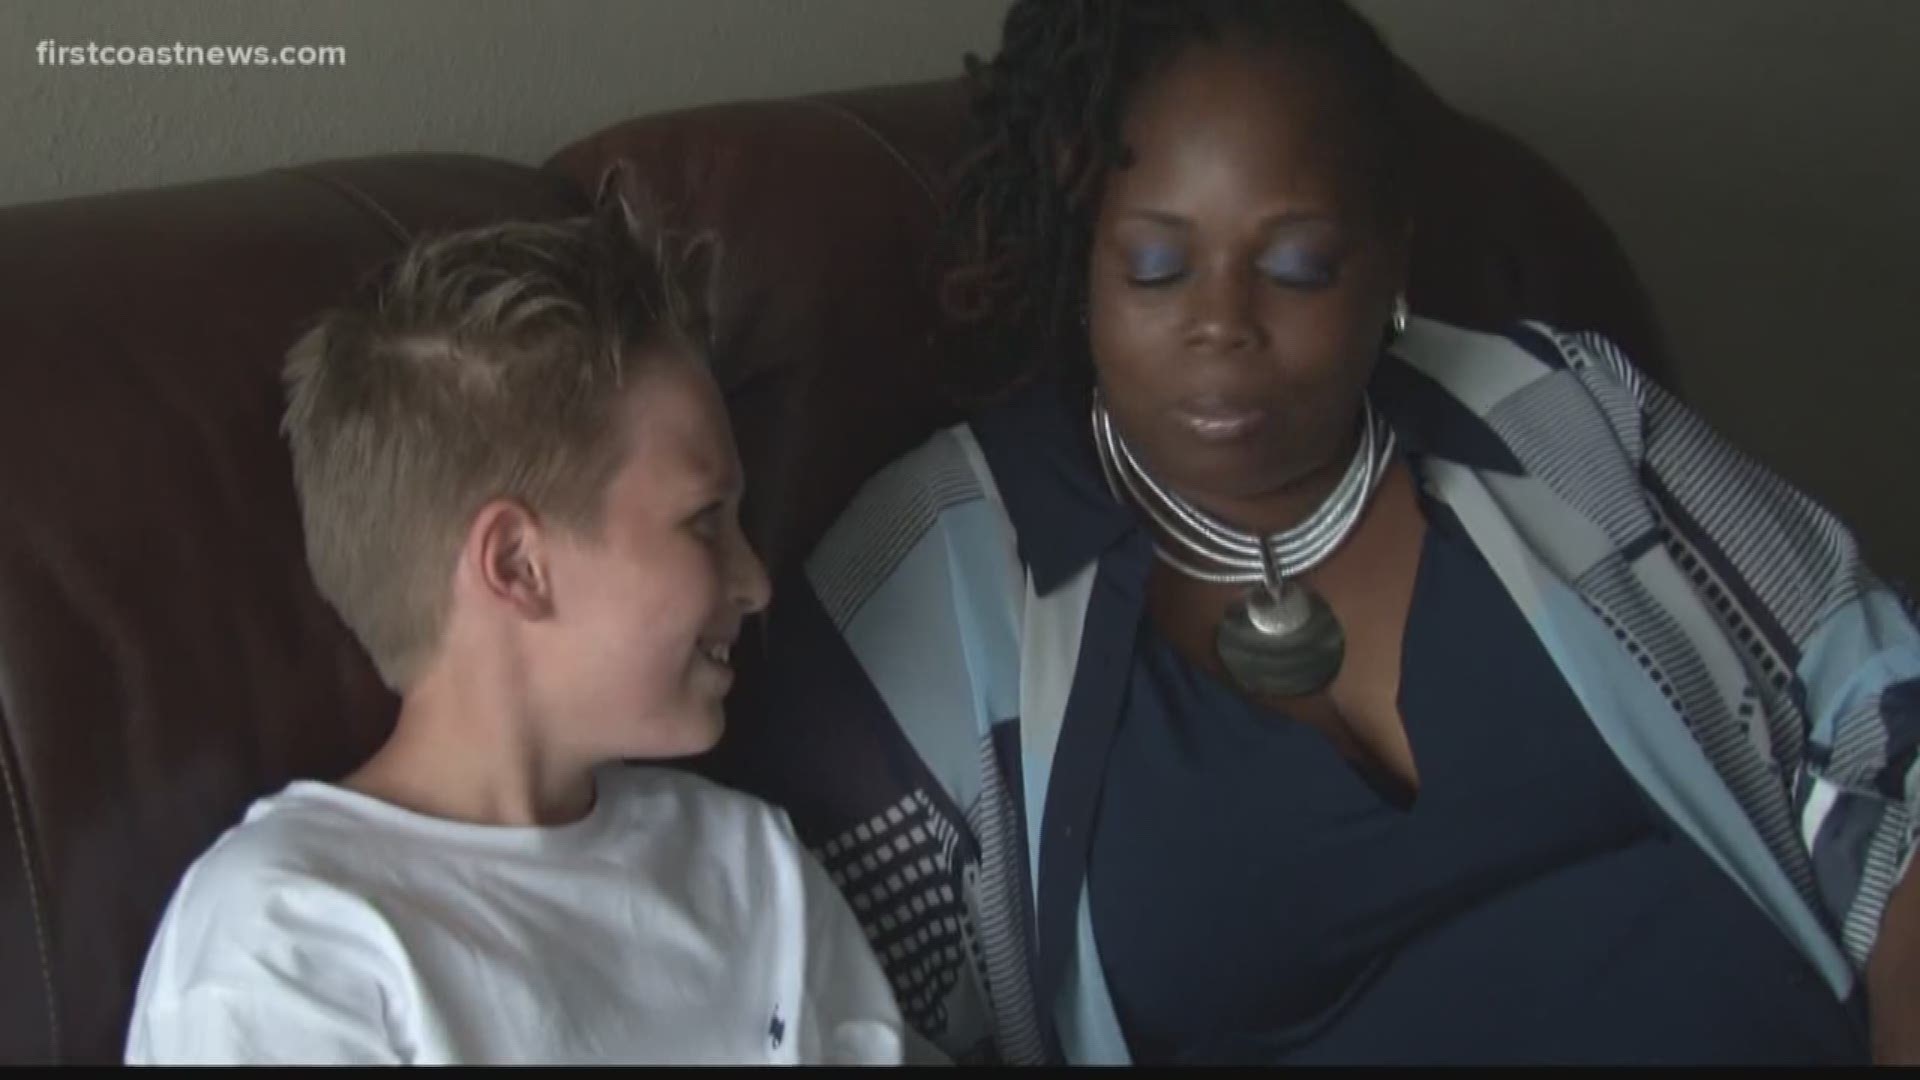 One local foster mother is using her past to help teens today. She provides an endless amount of love and helps kids look forward to their futures because she wasn't granted that growing up, she said.